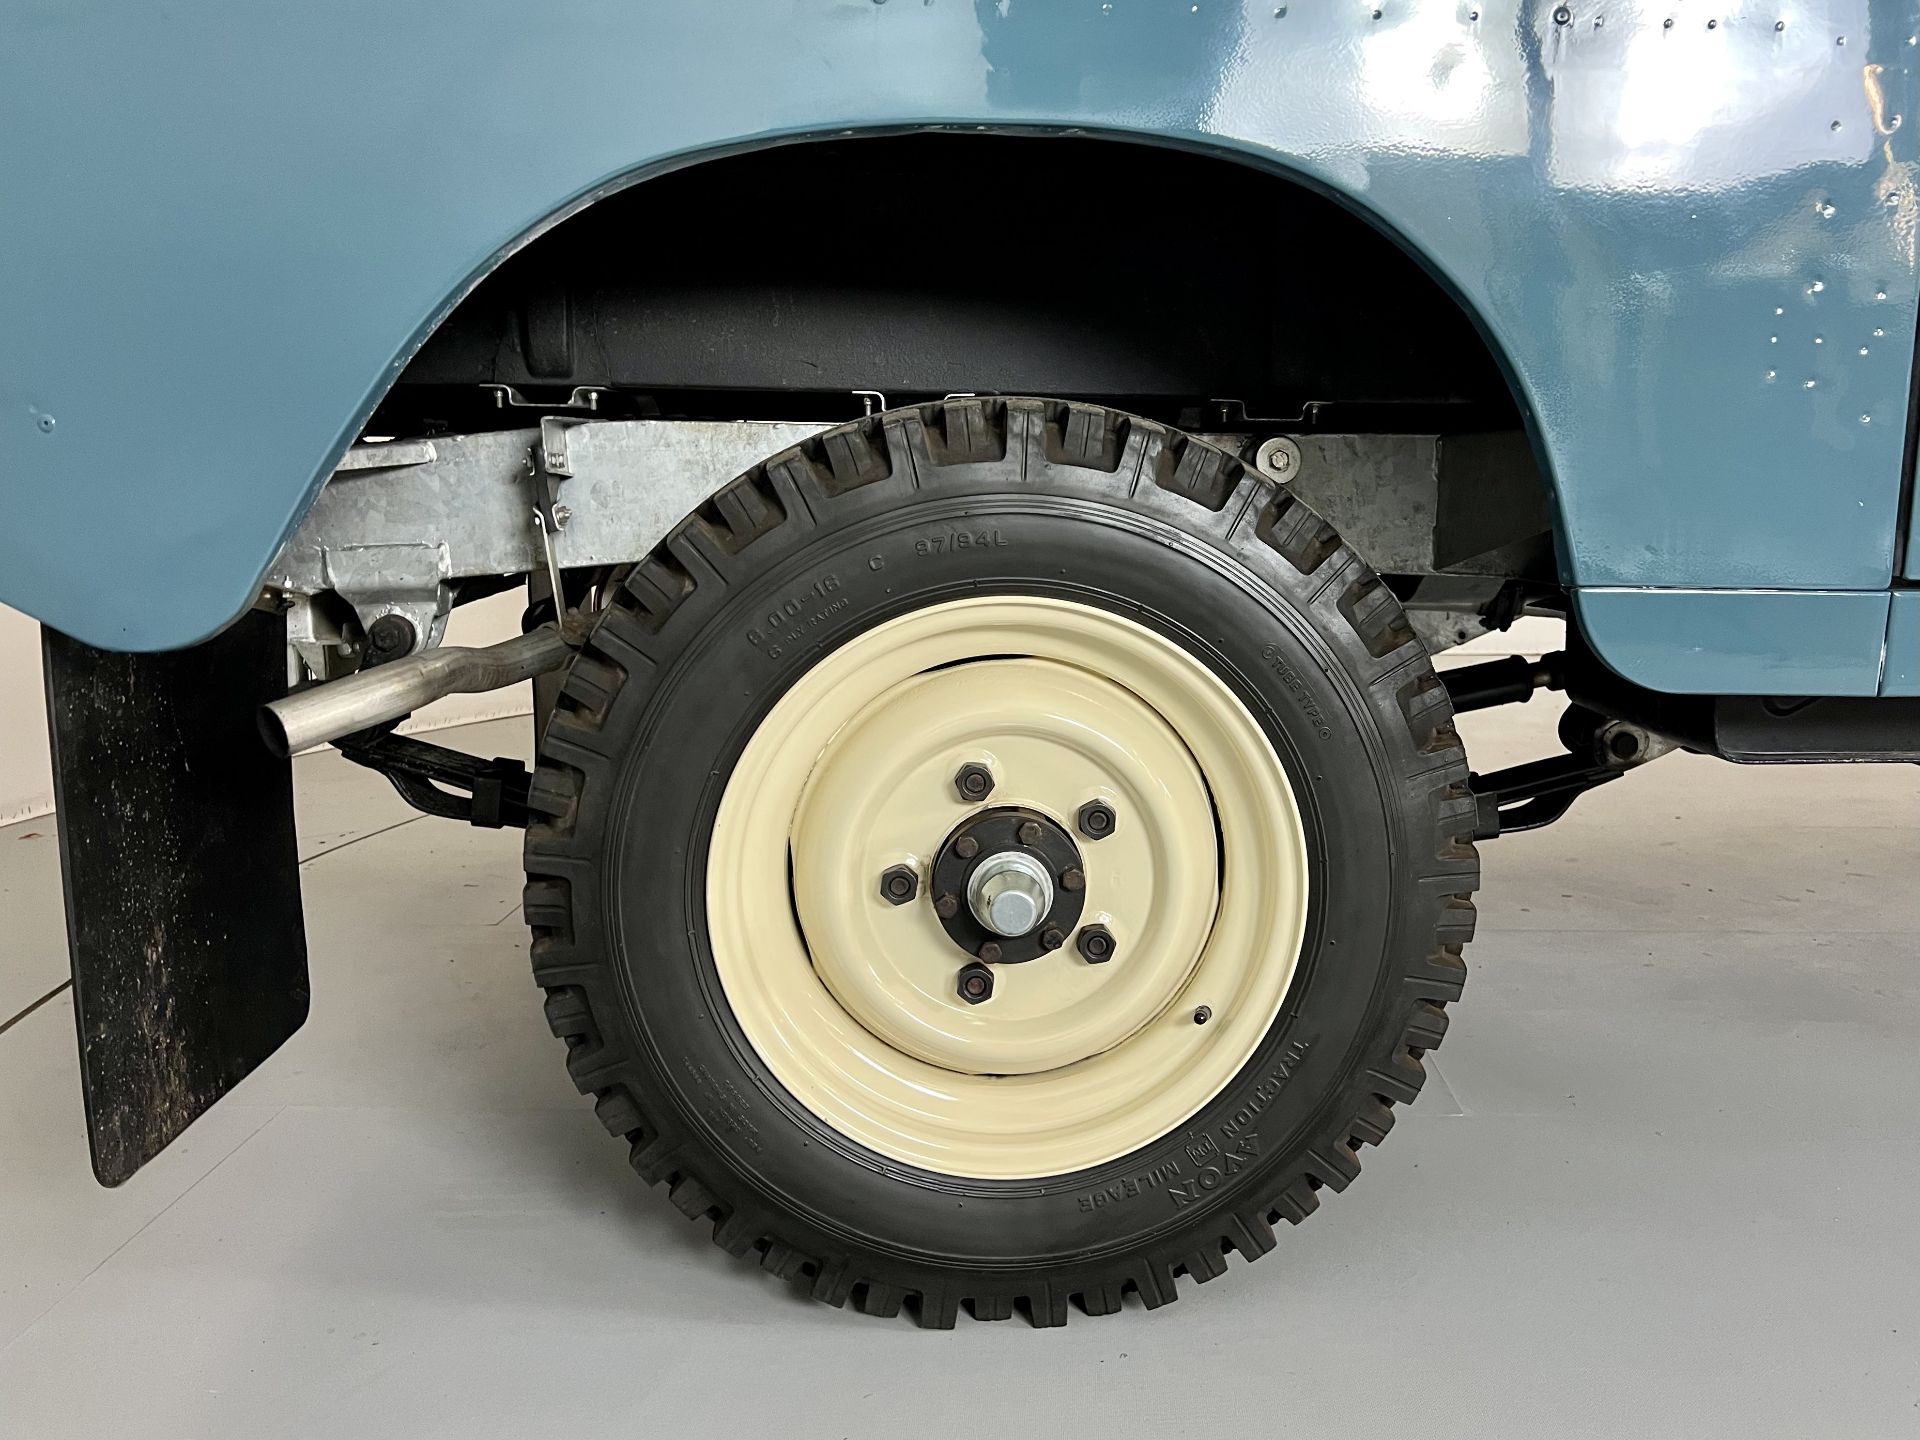 Land Rover Series 3 - Image 14 of 43